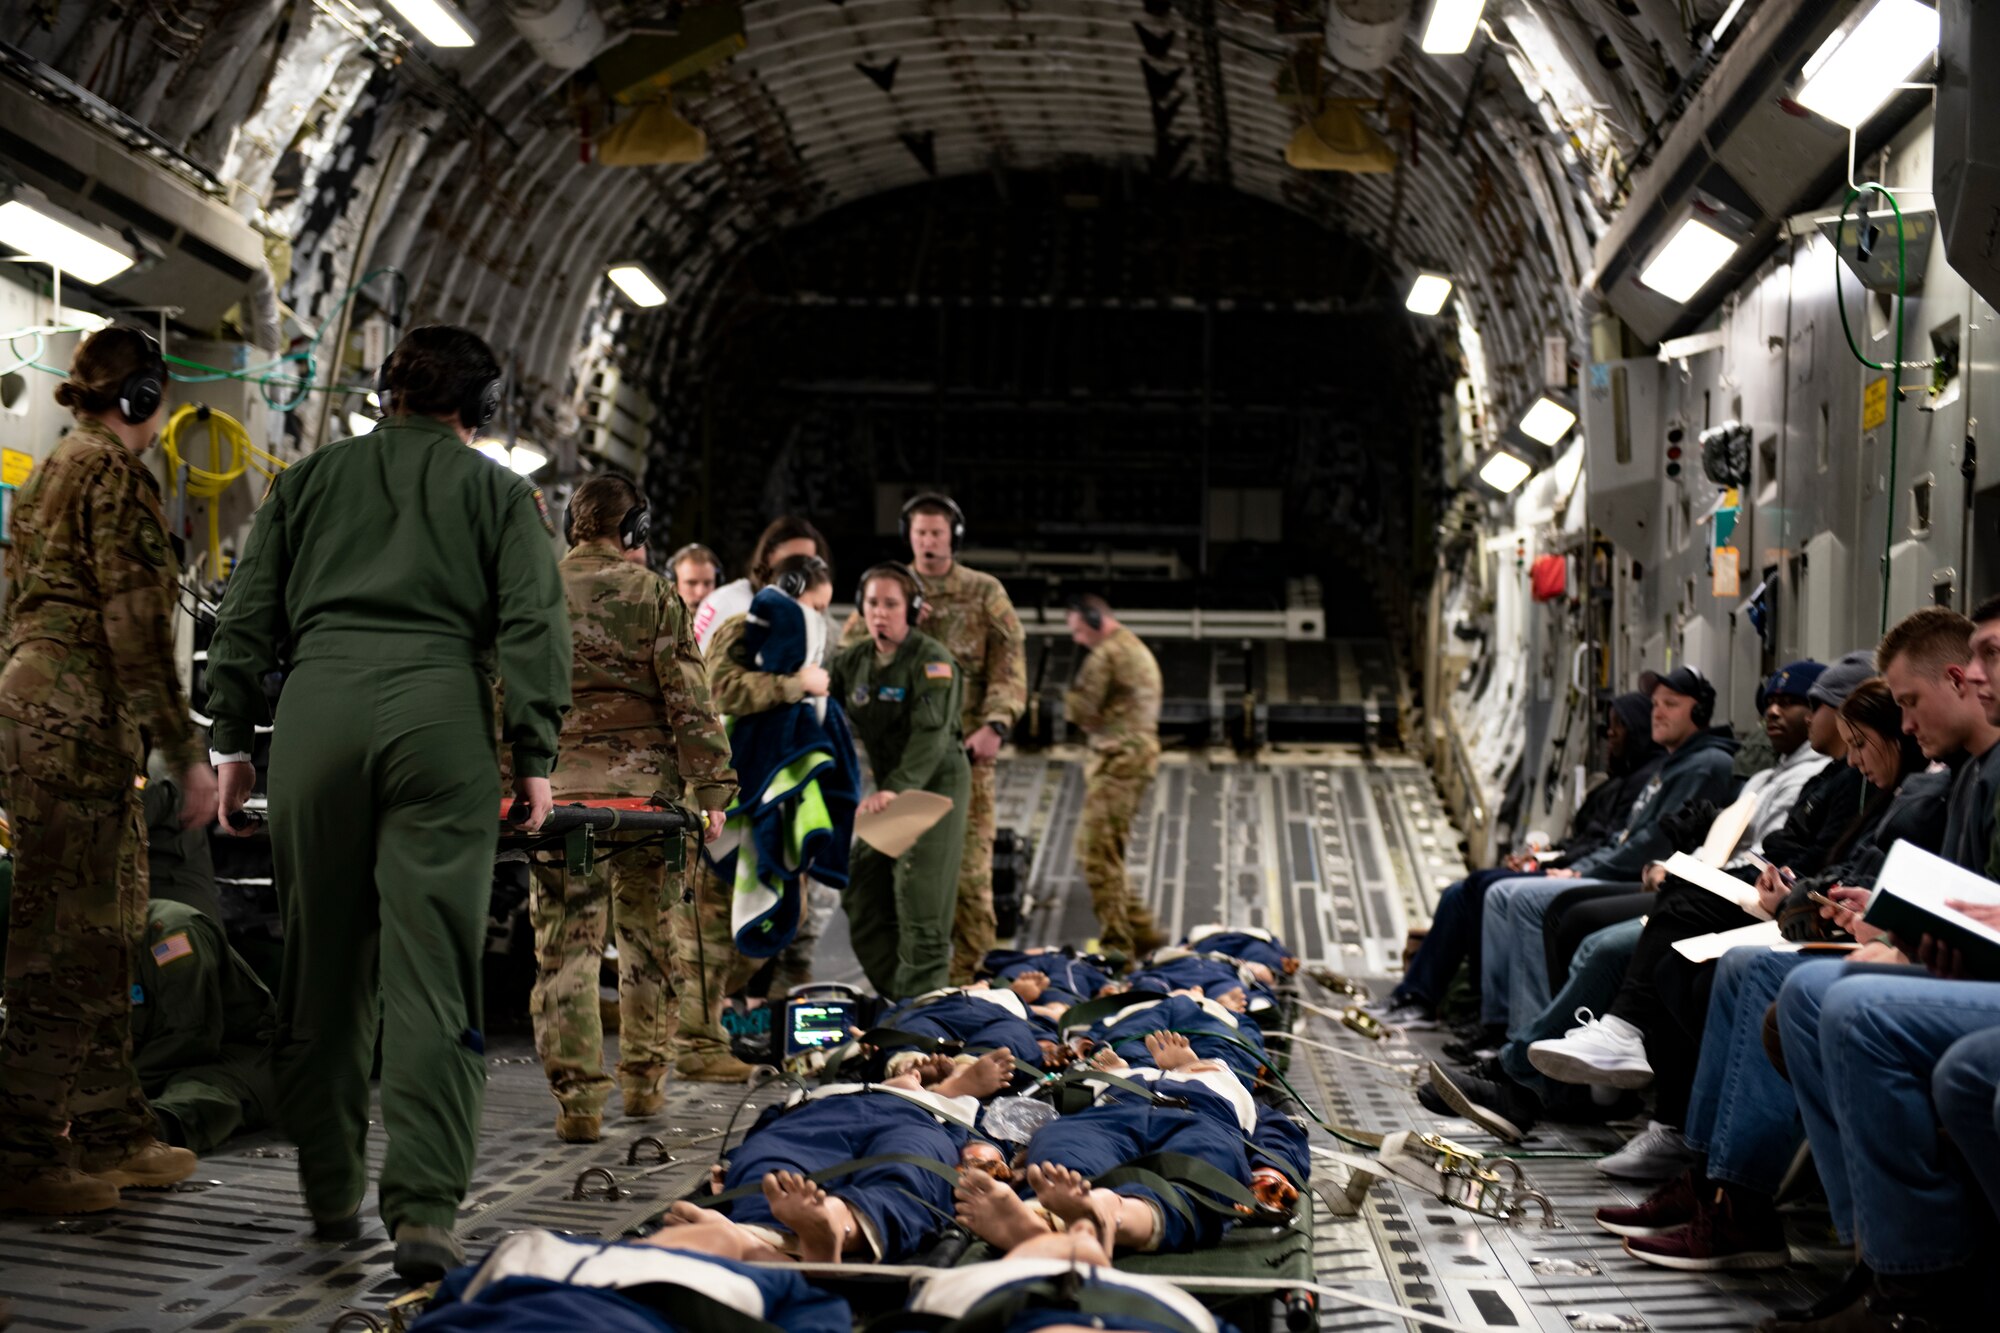 U.S. Air Force medical personnel assigned to multiple Air National Guard units respond to a simulated in-flight medical emergency on board of a C-17 Globemaster during Patriot South 2020 at the Gulfport Combat Readiness Training Center in Gulfport, Miss., Feb. 27, 2020.  PATRIOT is a Domestic Operations disaster-response training exercise conducted by National Guard units working with federal, state and local emergency management agencies and first responders. (U.S. Air National Guard photo by Technical Sgt. L. Roland Sturm)